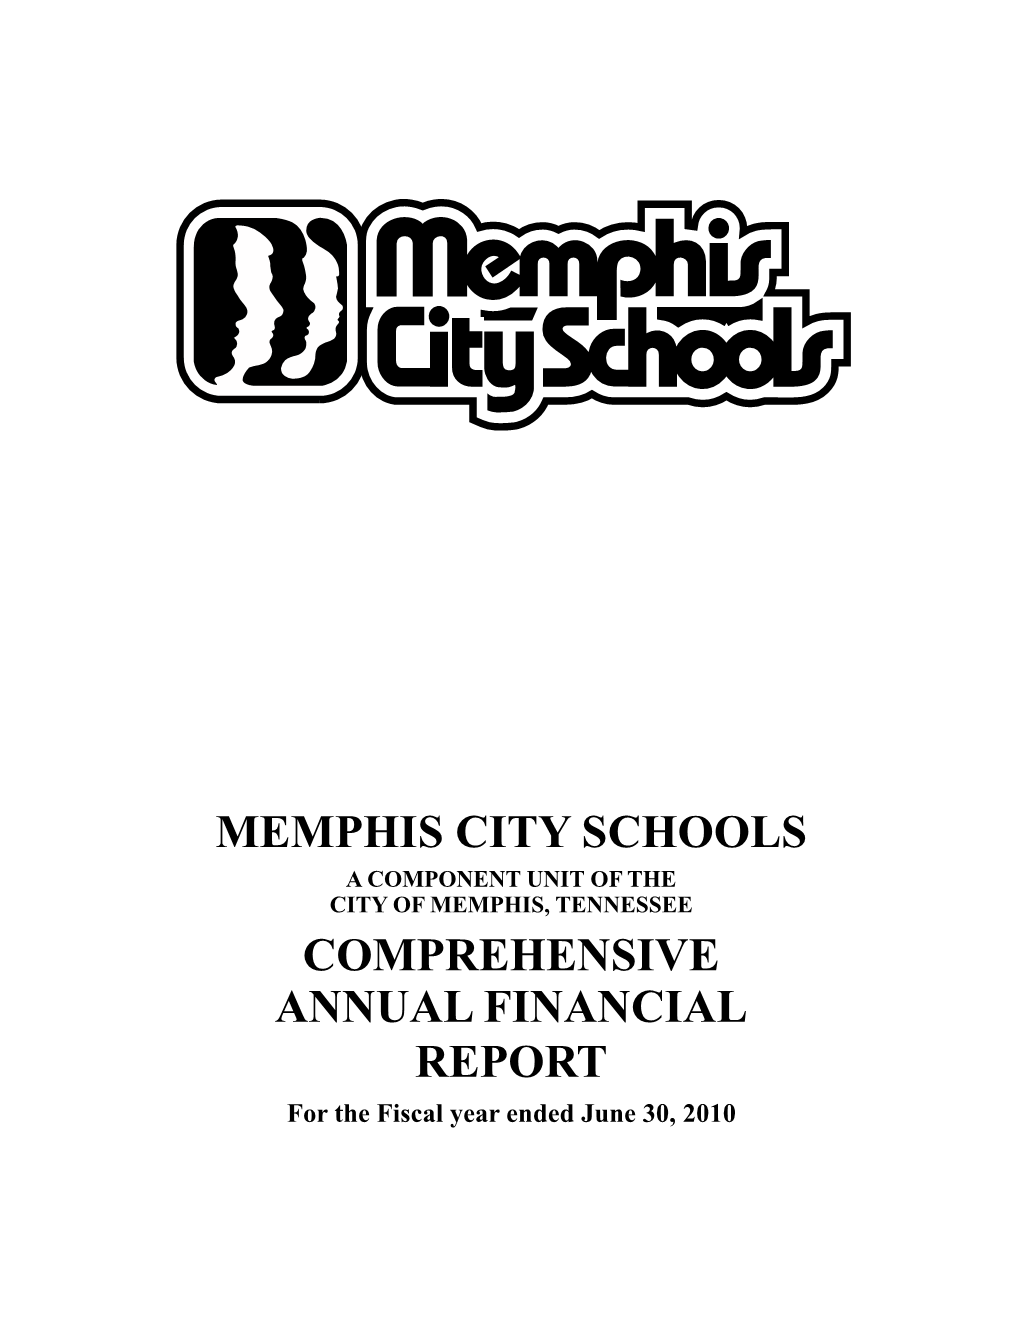 MEMPHIS CITY SCHOOLS a COMPONENT UNIT of the CITY of MEMPHIS, TENNESSEE COMPREHENSIVE ANNUAL FINANCIAL REPORT for the Fiscal Year Ended June 30, 2010